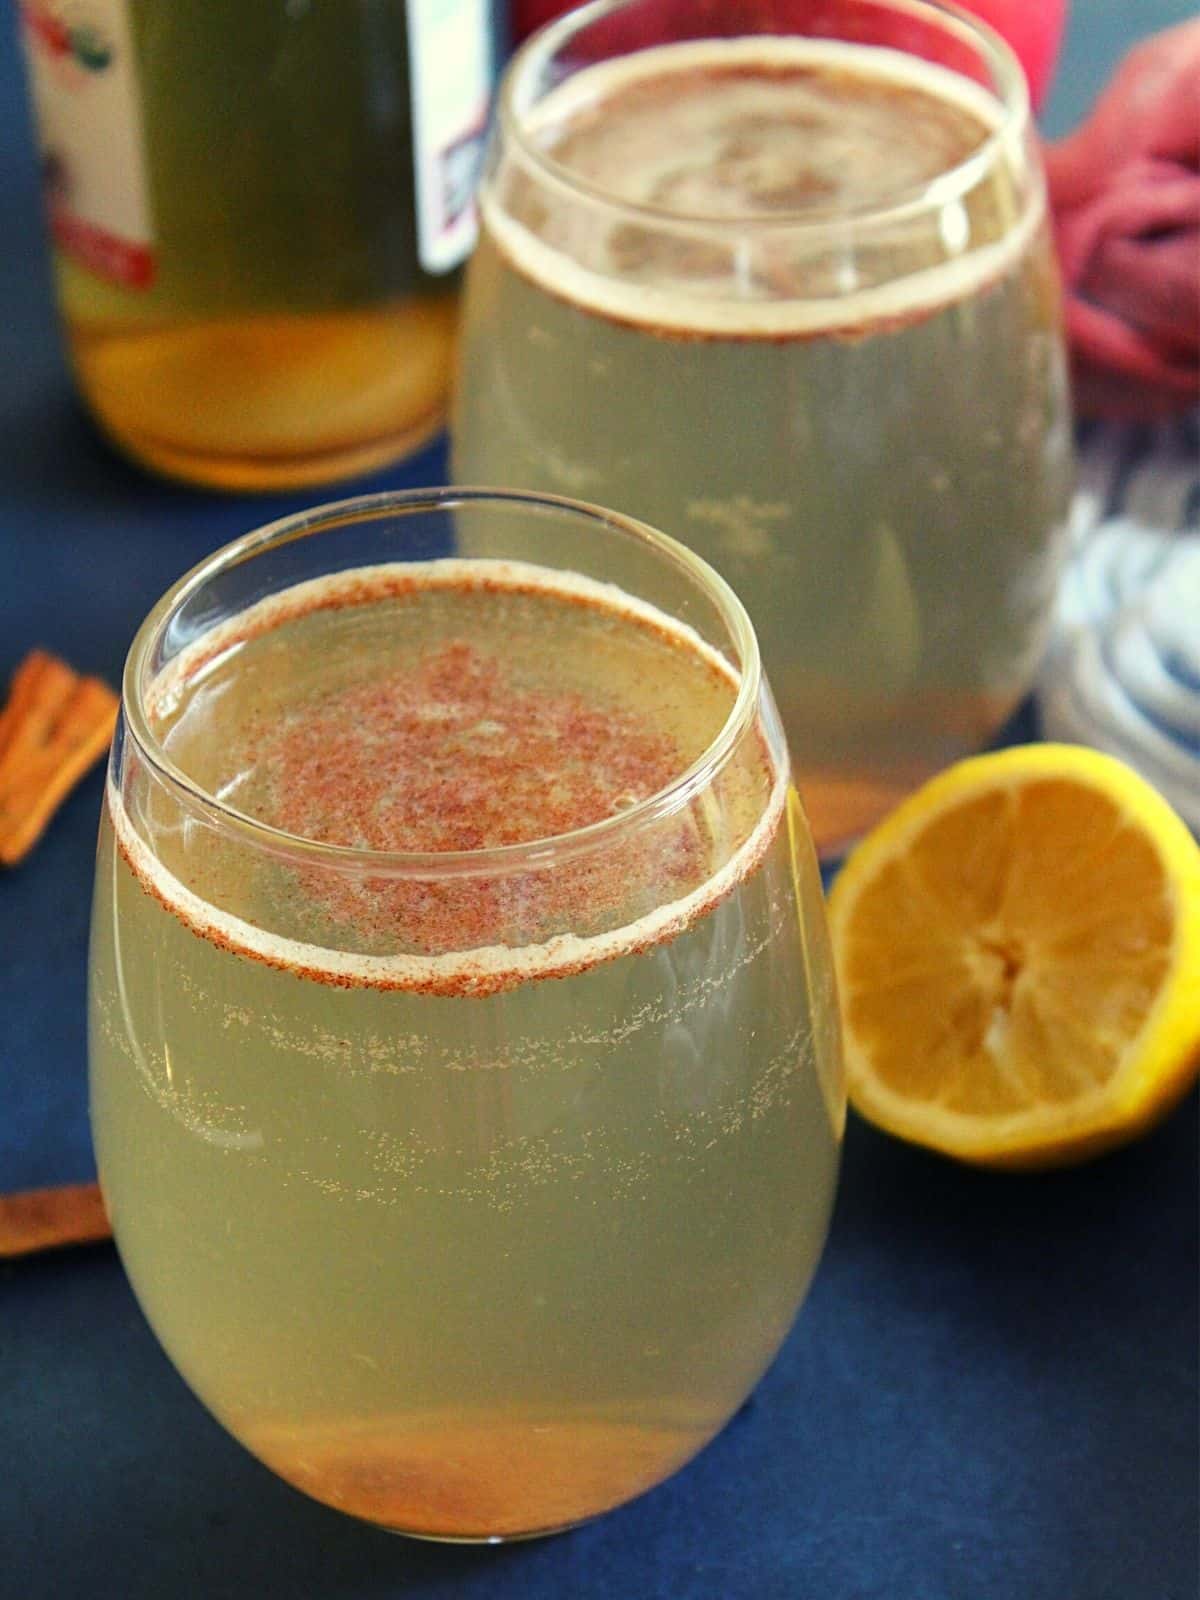 apple cider vinegar and honey drink with cinnamon is served in a glass with lemon